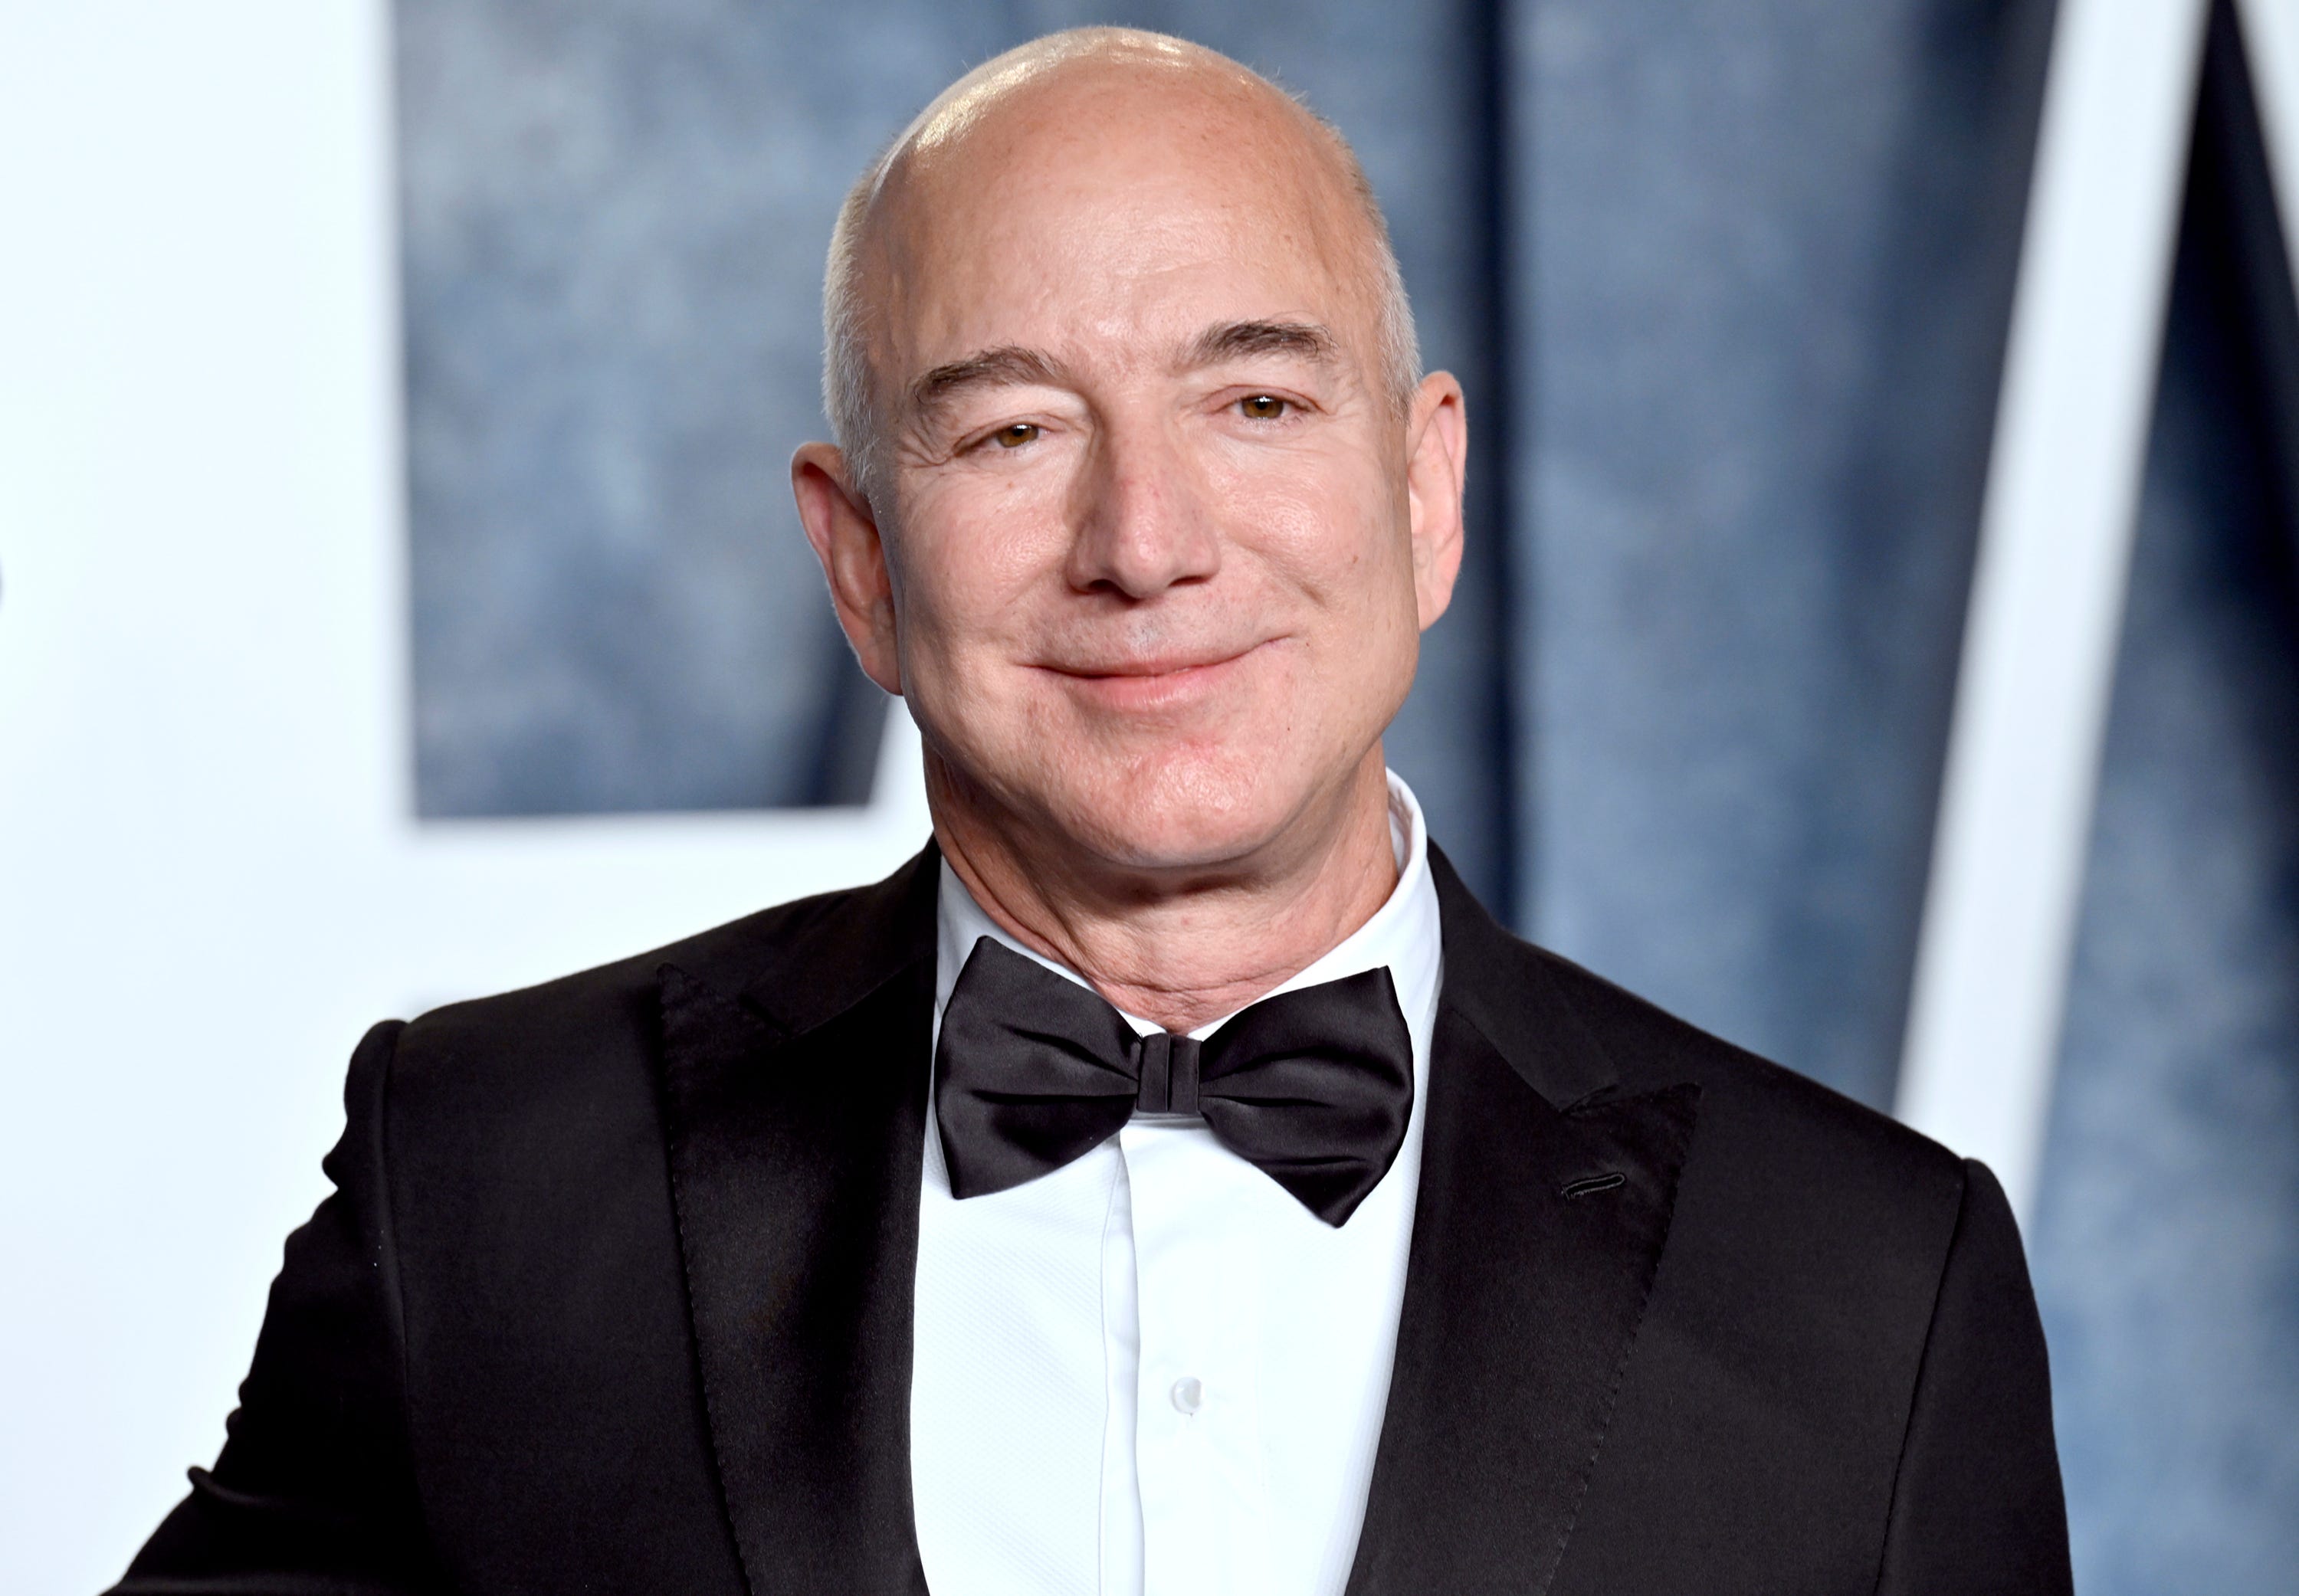 amazon, $200 billion: jeff bezos back on top as world's richest person, jumping elon musk in bloomberg ranking